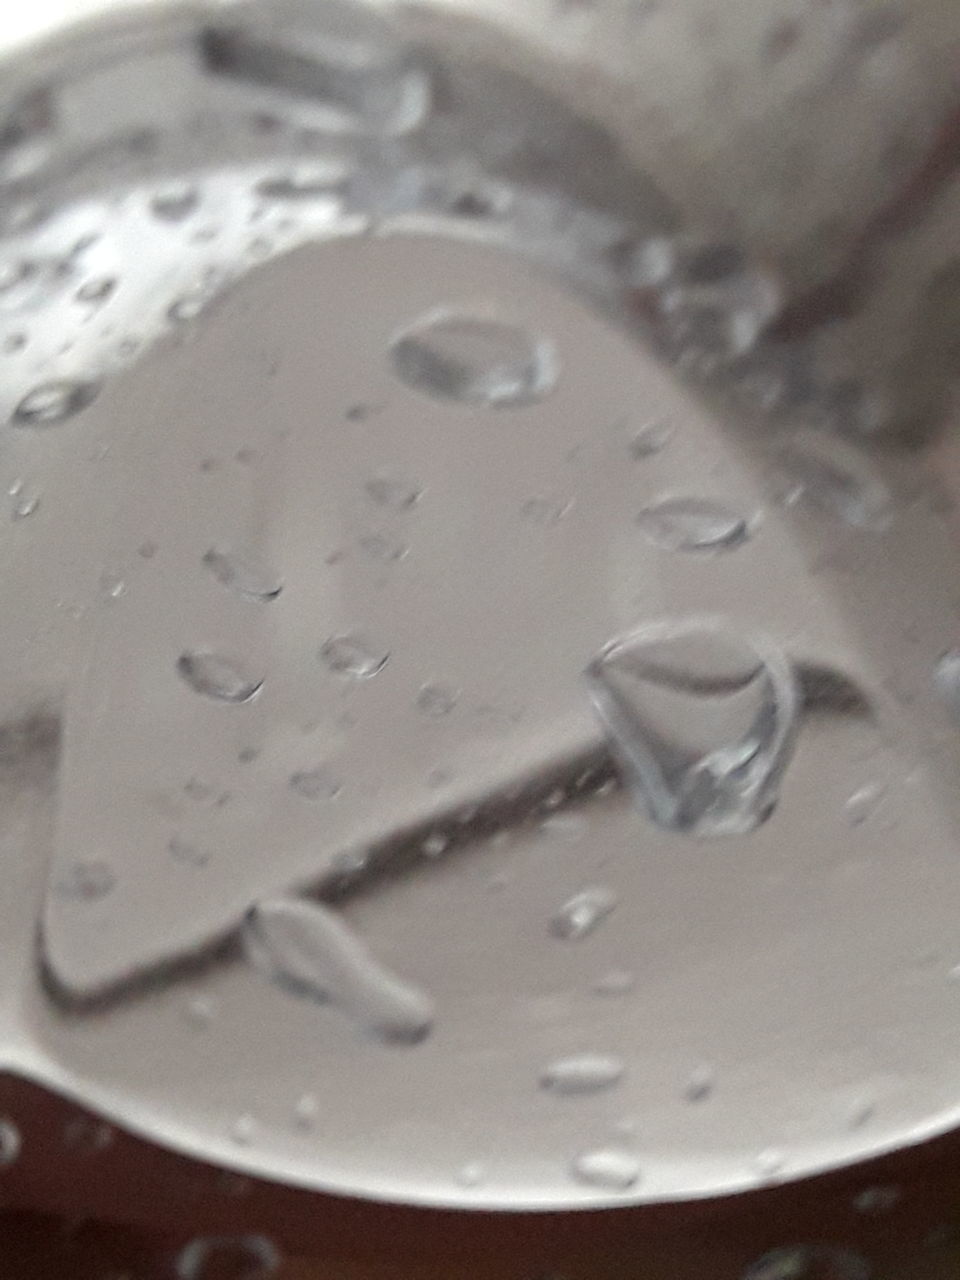 CLOSE-UP OF WATER DROPS ON PLATE